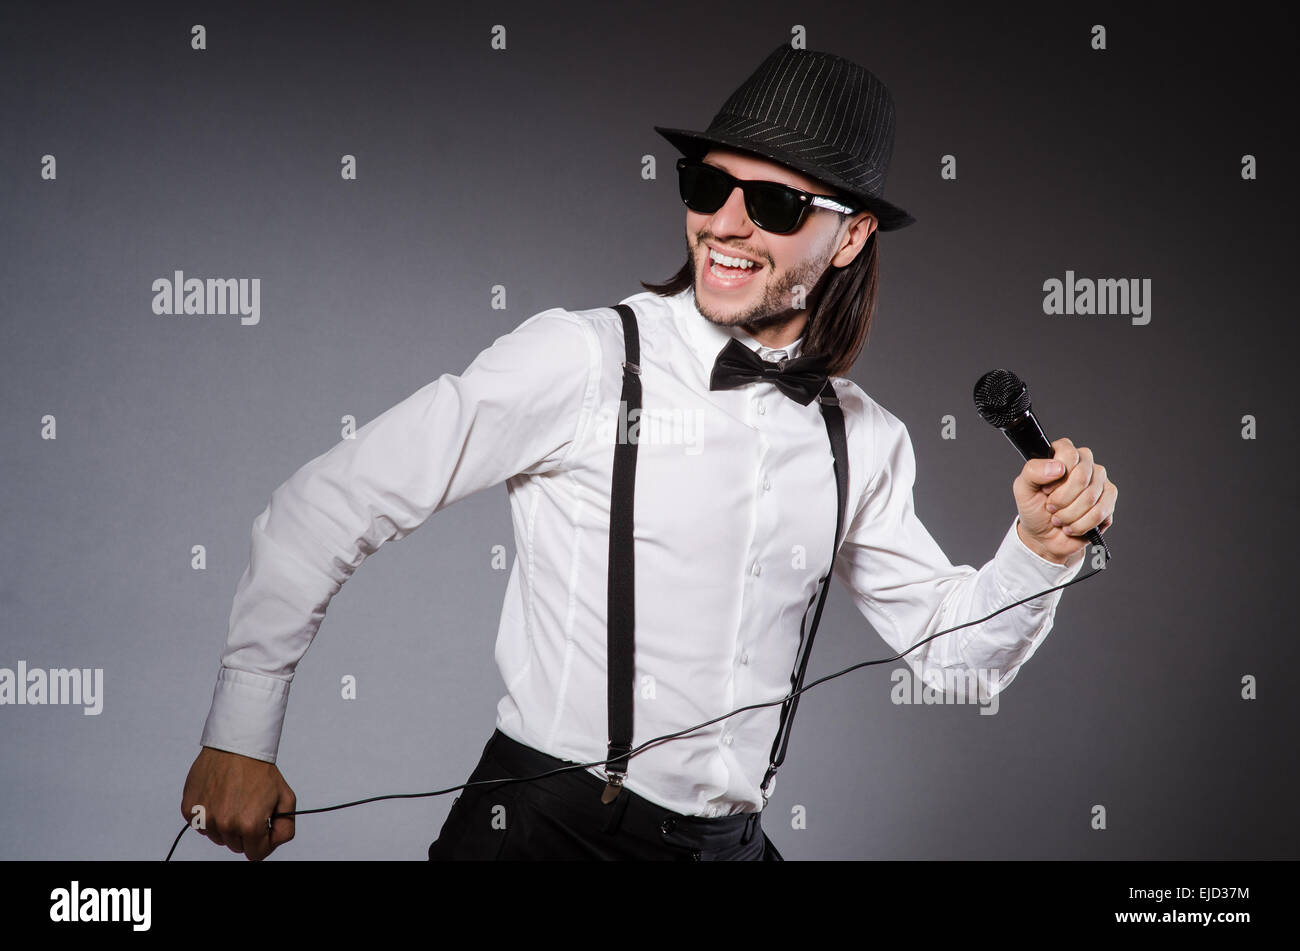 Funny singer with microphone at the concert Stock Photo - Alamy